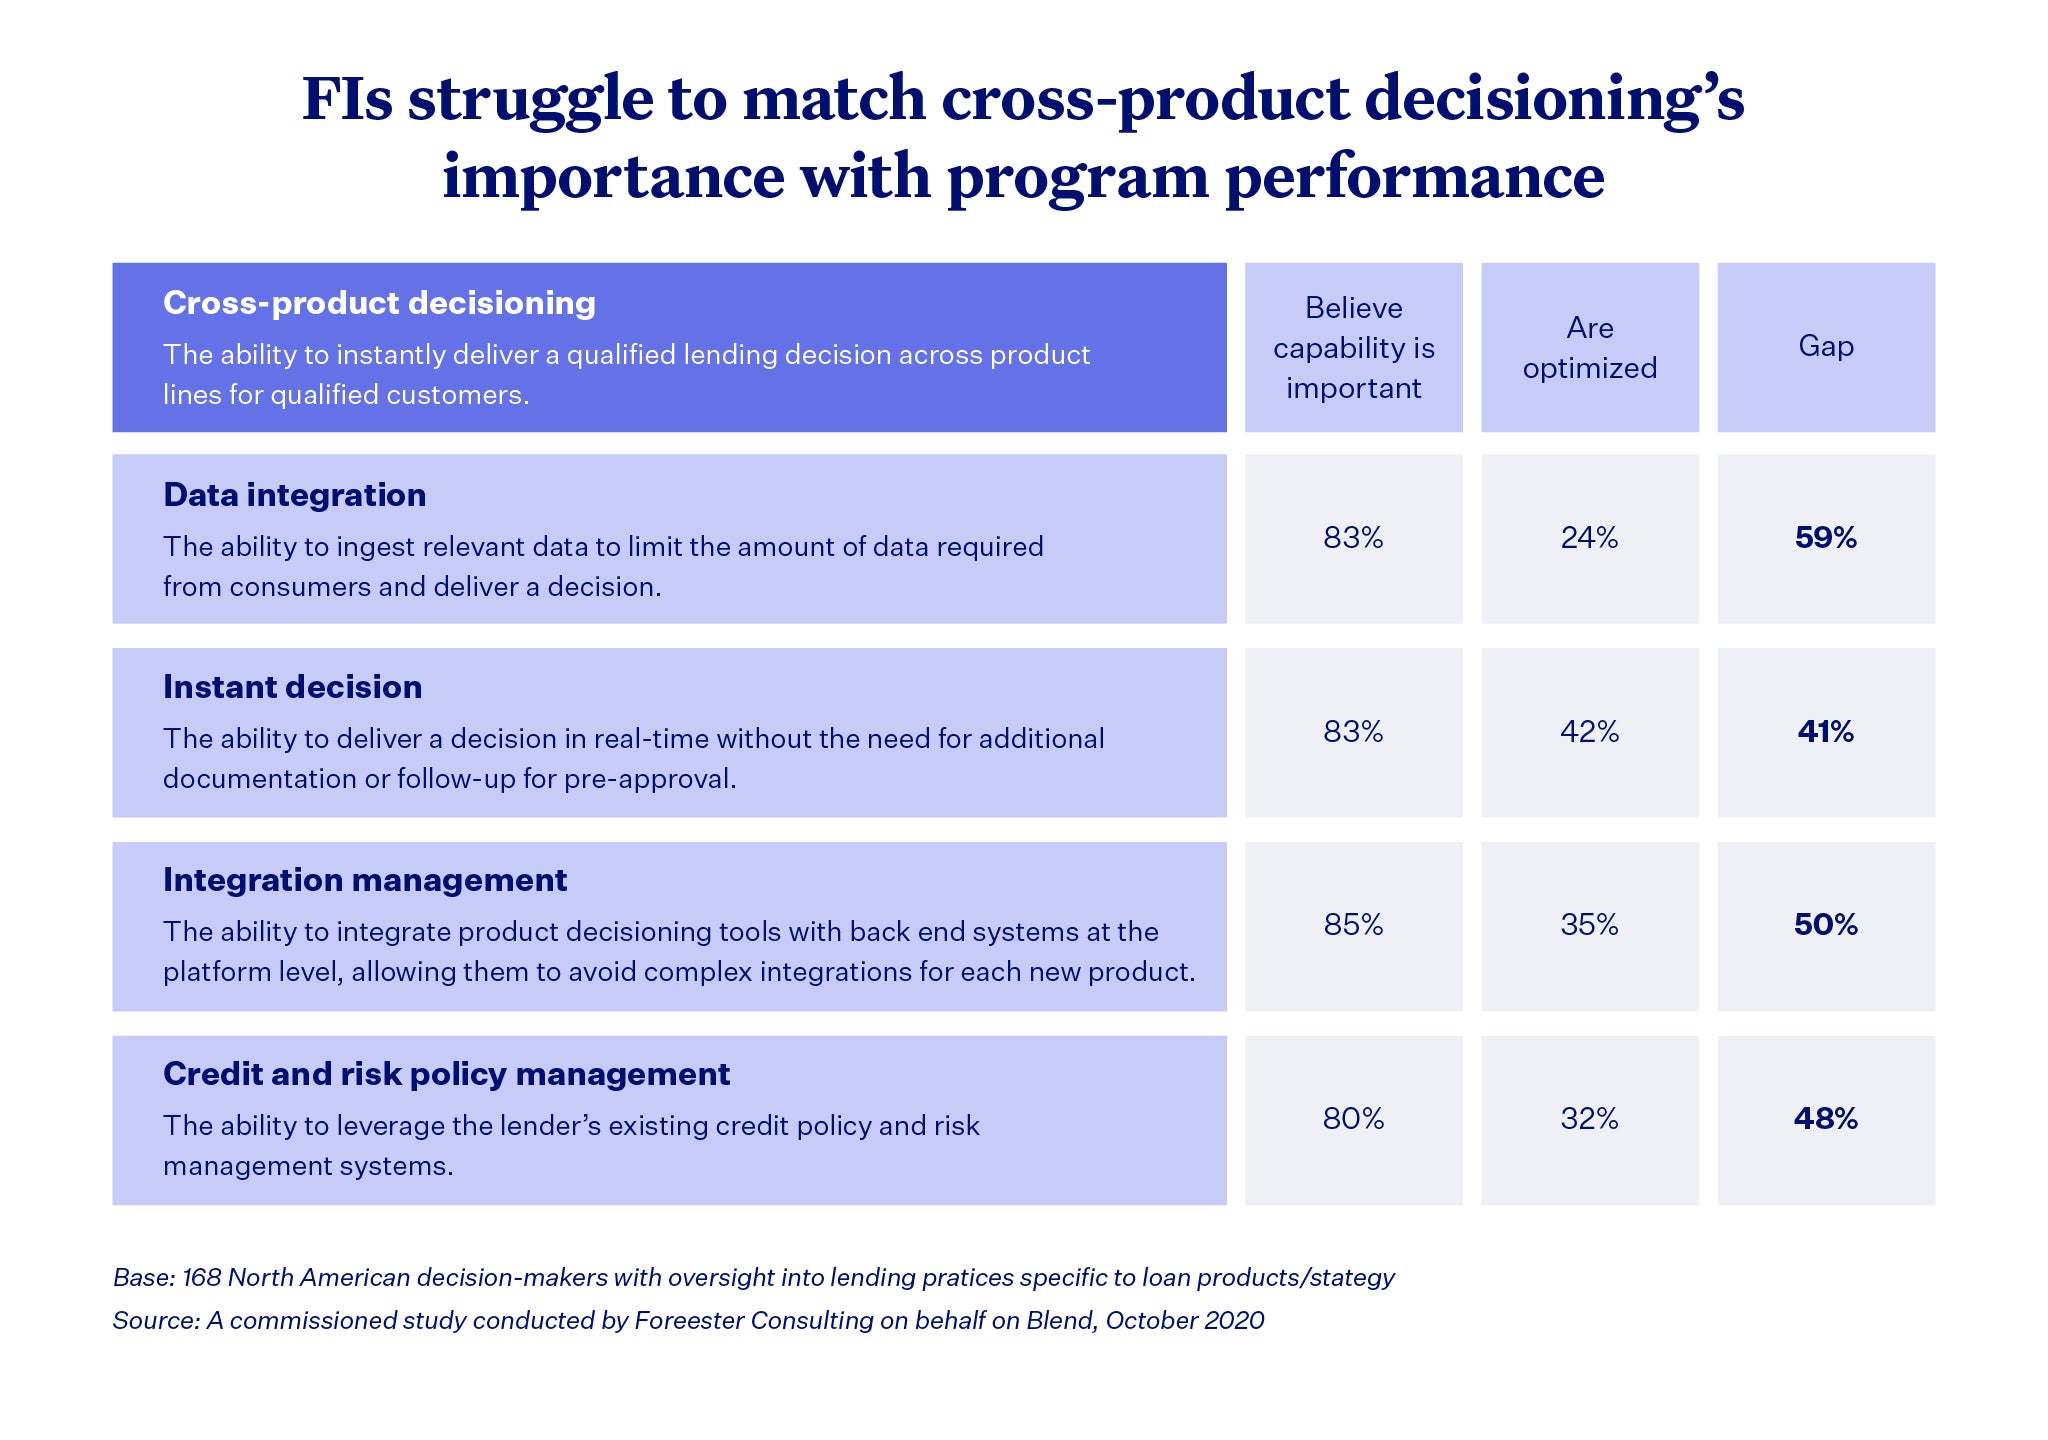 Chart describing the gap in cross-product decisioning efforts